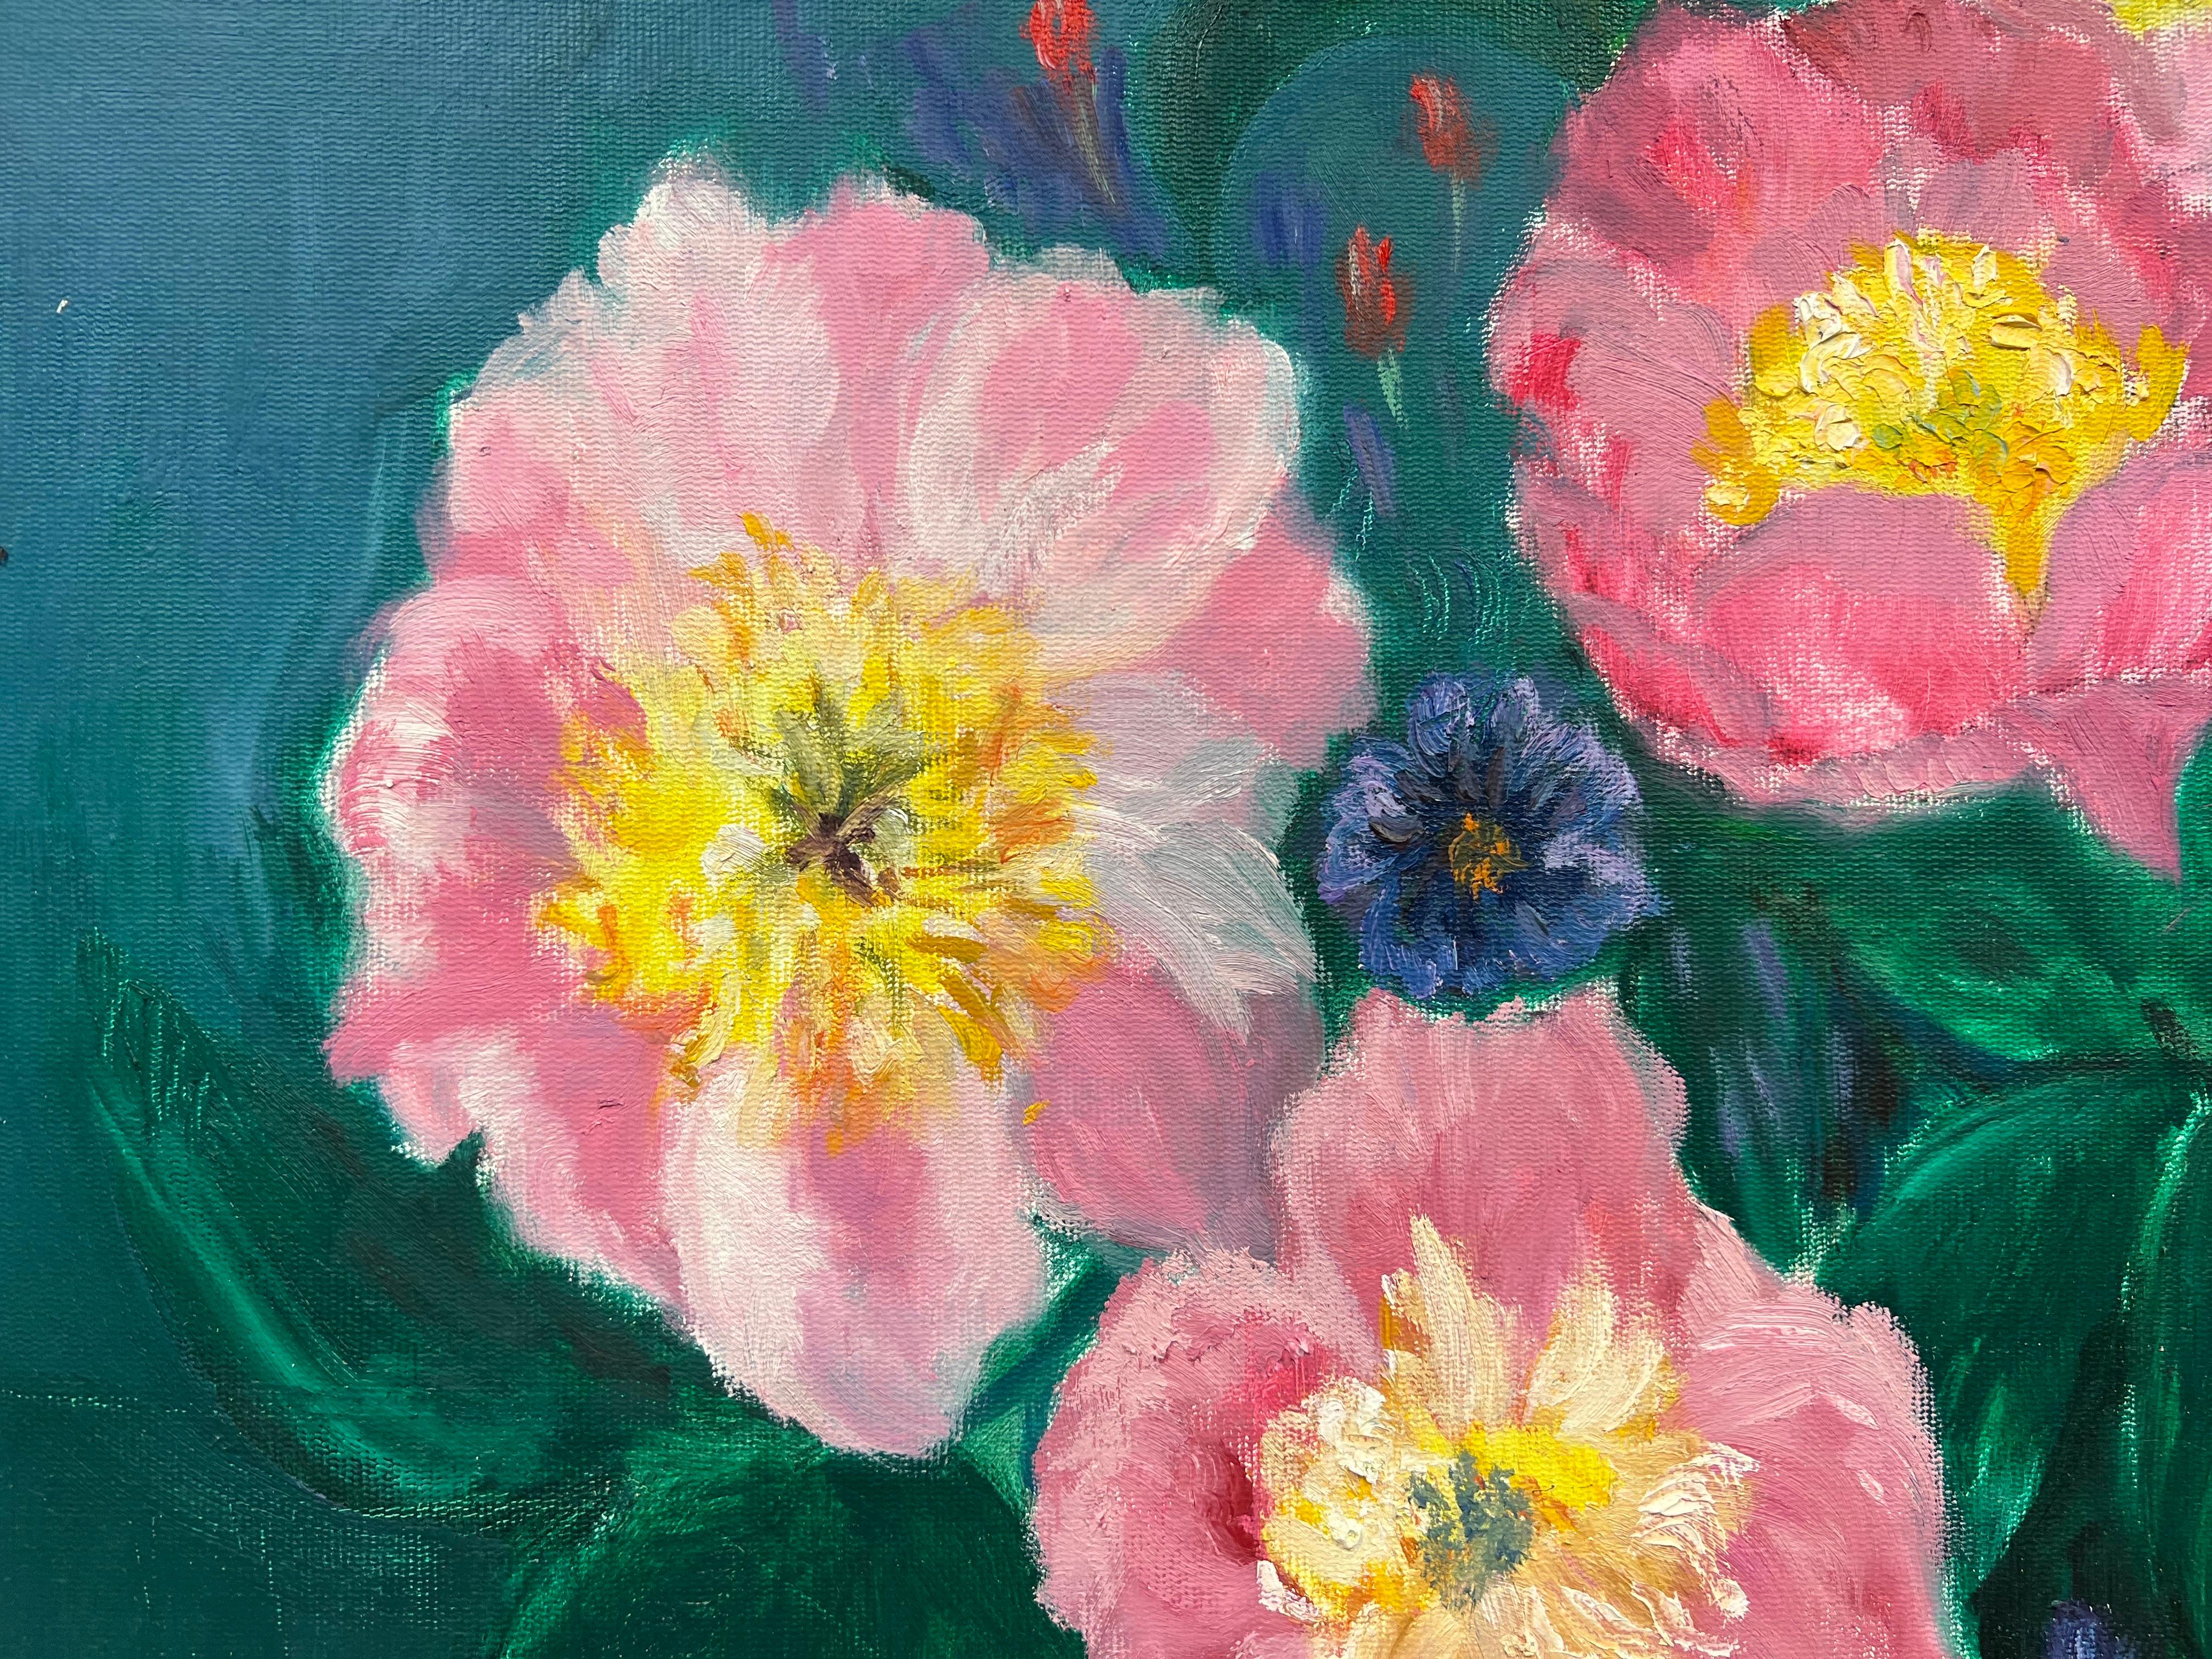 Large British Contemporary Painting - Pink Flowers against Blue Background For Sale 4